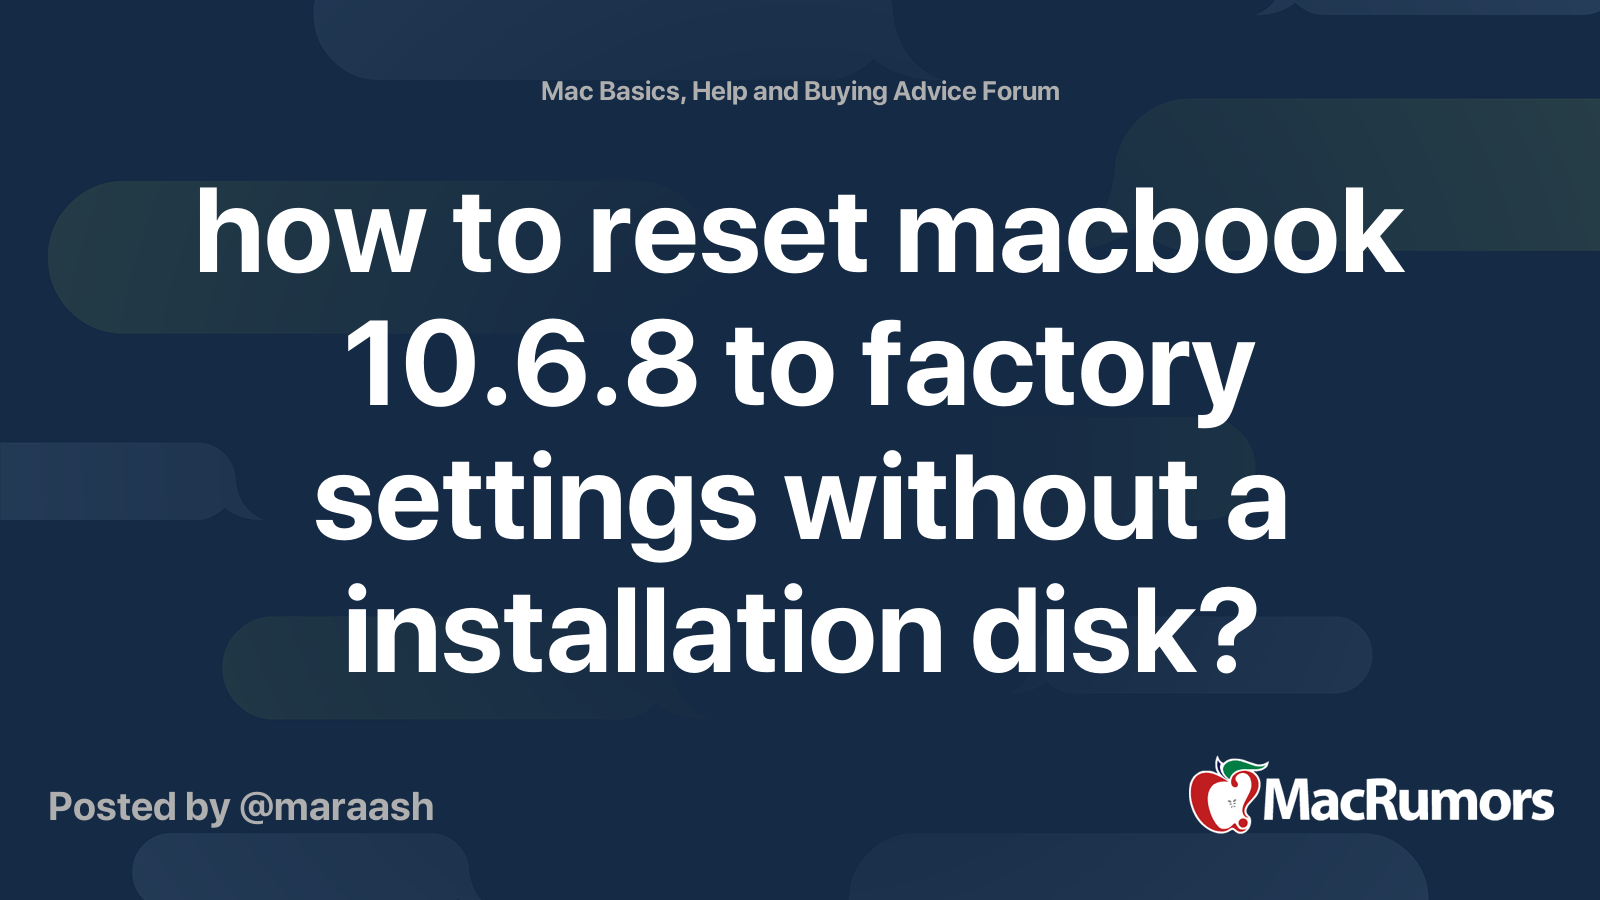 how to reset macbook 10.6.8 to factory settings without a installation